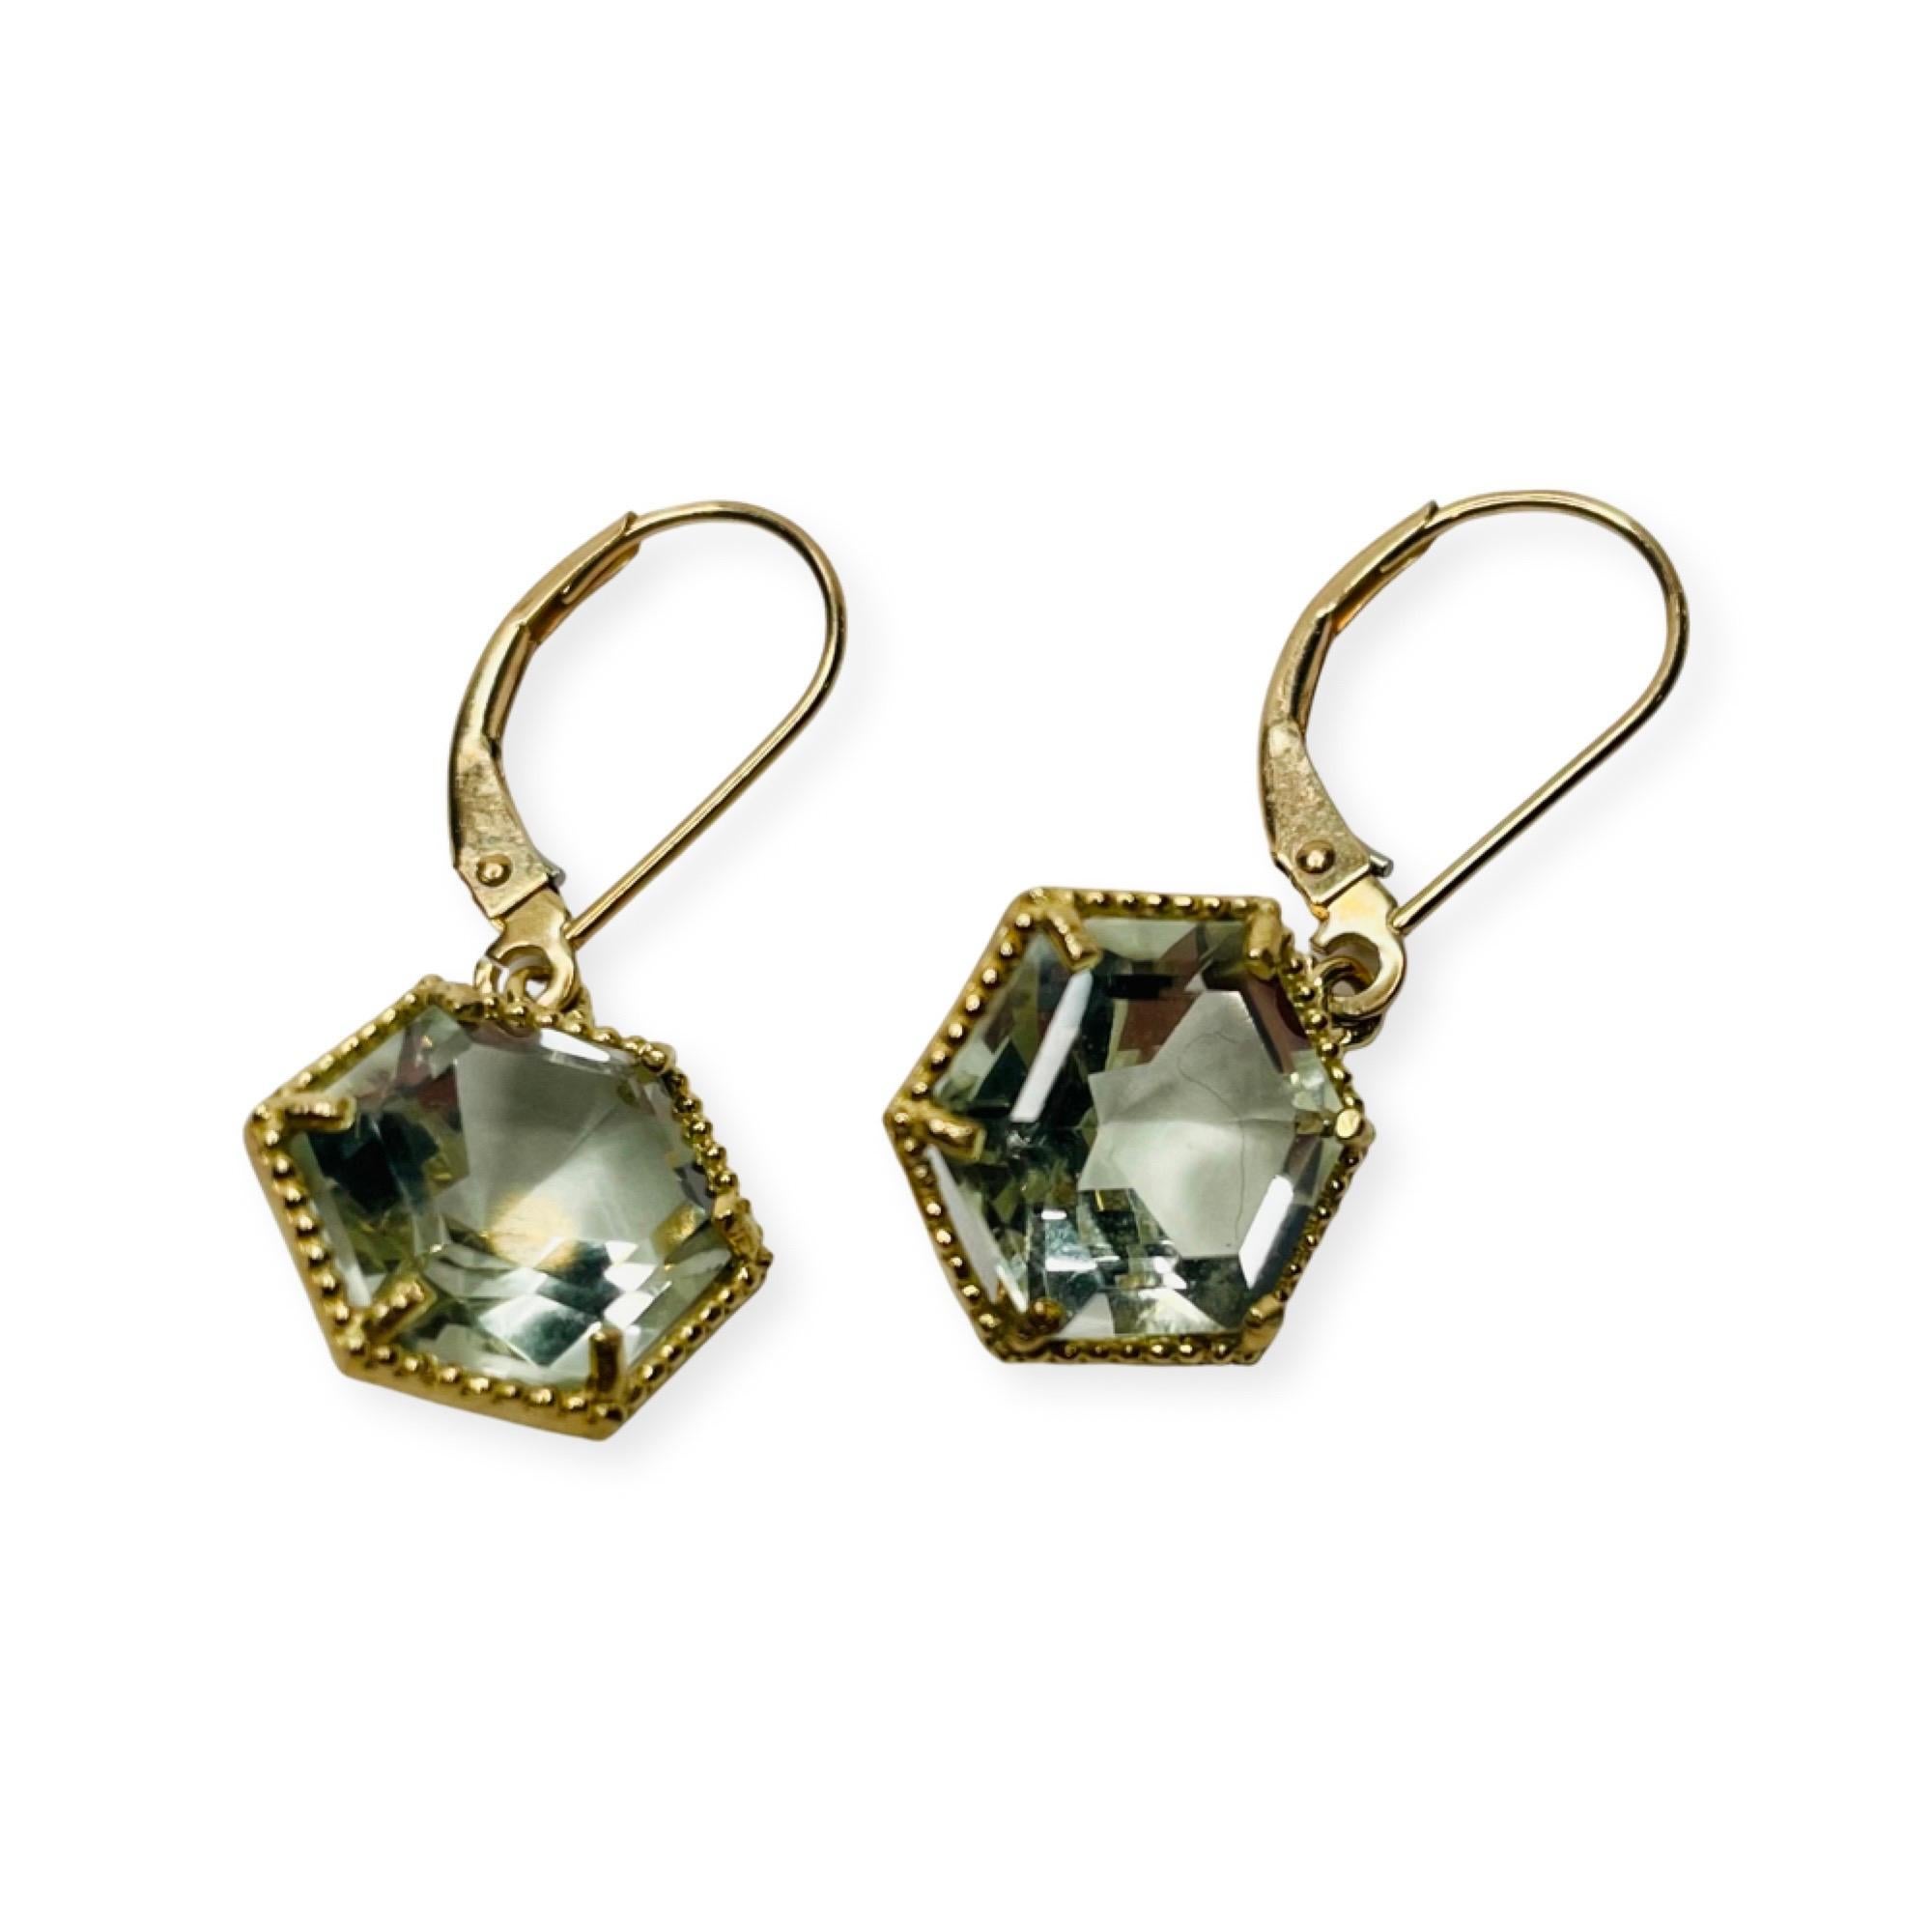 Lithos 14K Yellow Gold Green Amethyst Earrings. There is 7.0 carats of green amethyst. They are faceted in a hexagonal pattern and are prong set. They have milgraining around the outside. They have lever back closures.
400-70-818